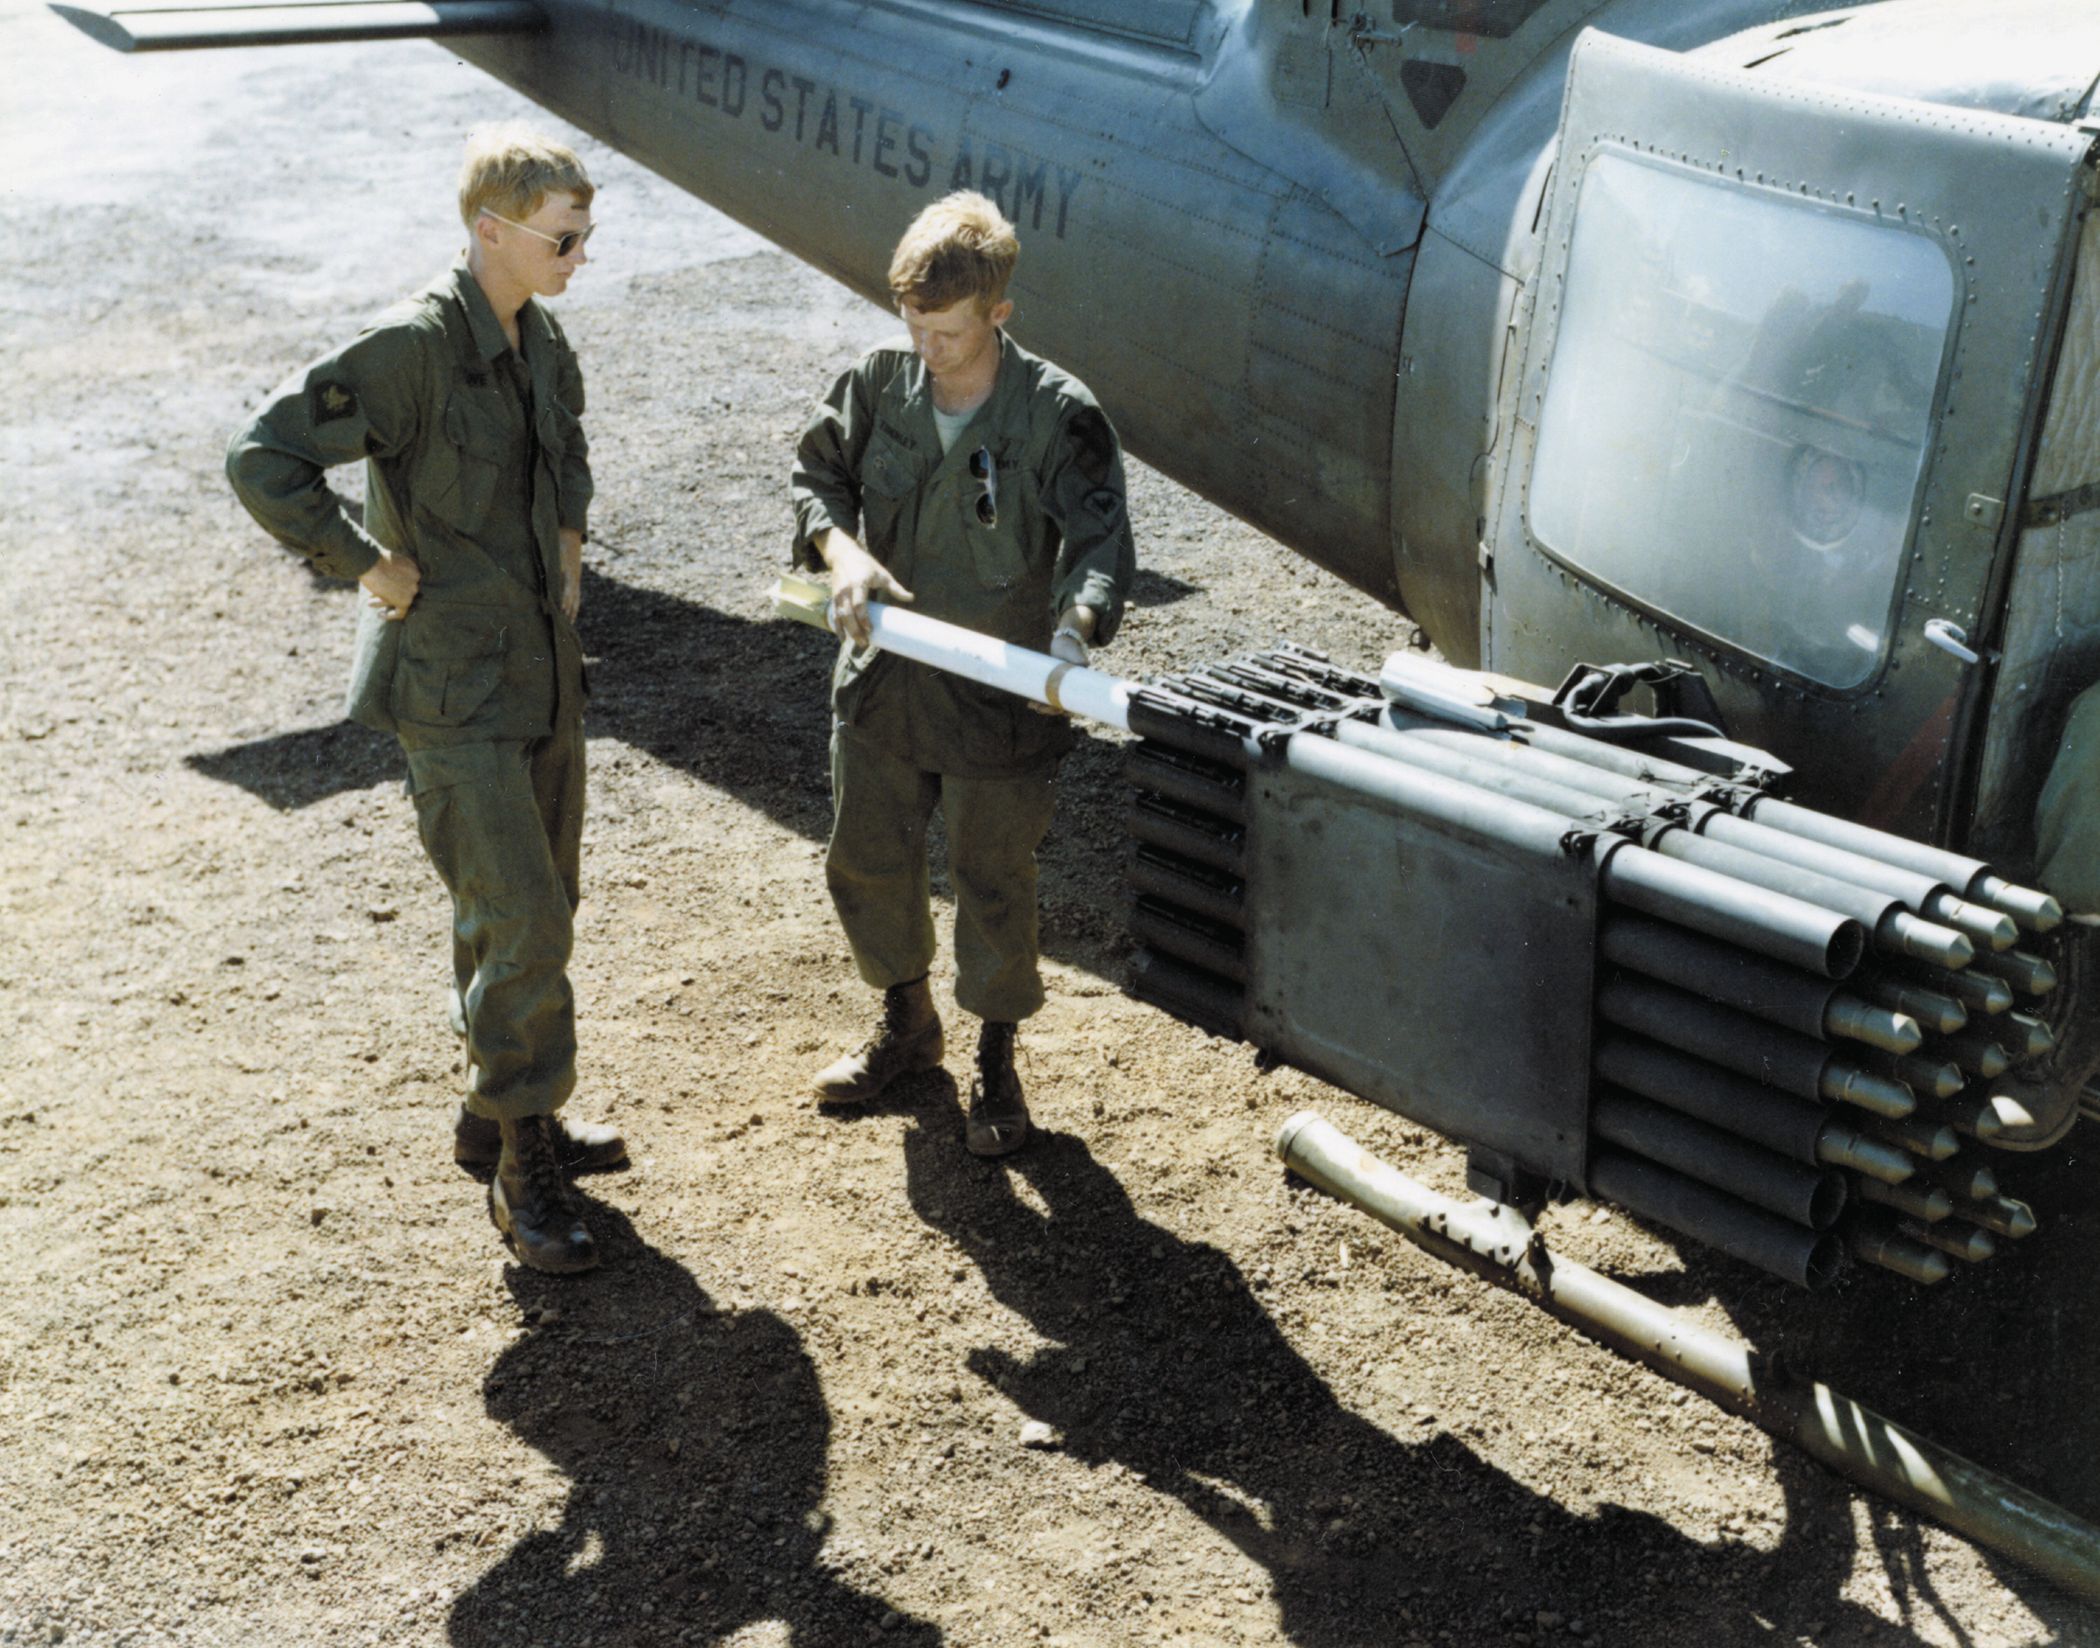 Crew Chief Eddie Townley of the 20th Artillery shows SP4 William Love the proper way to load and arm aerial rockets on a UH-1B in July 1967.